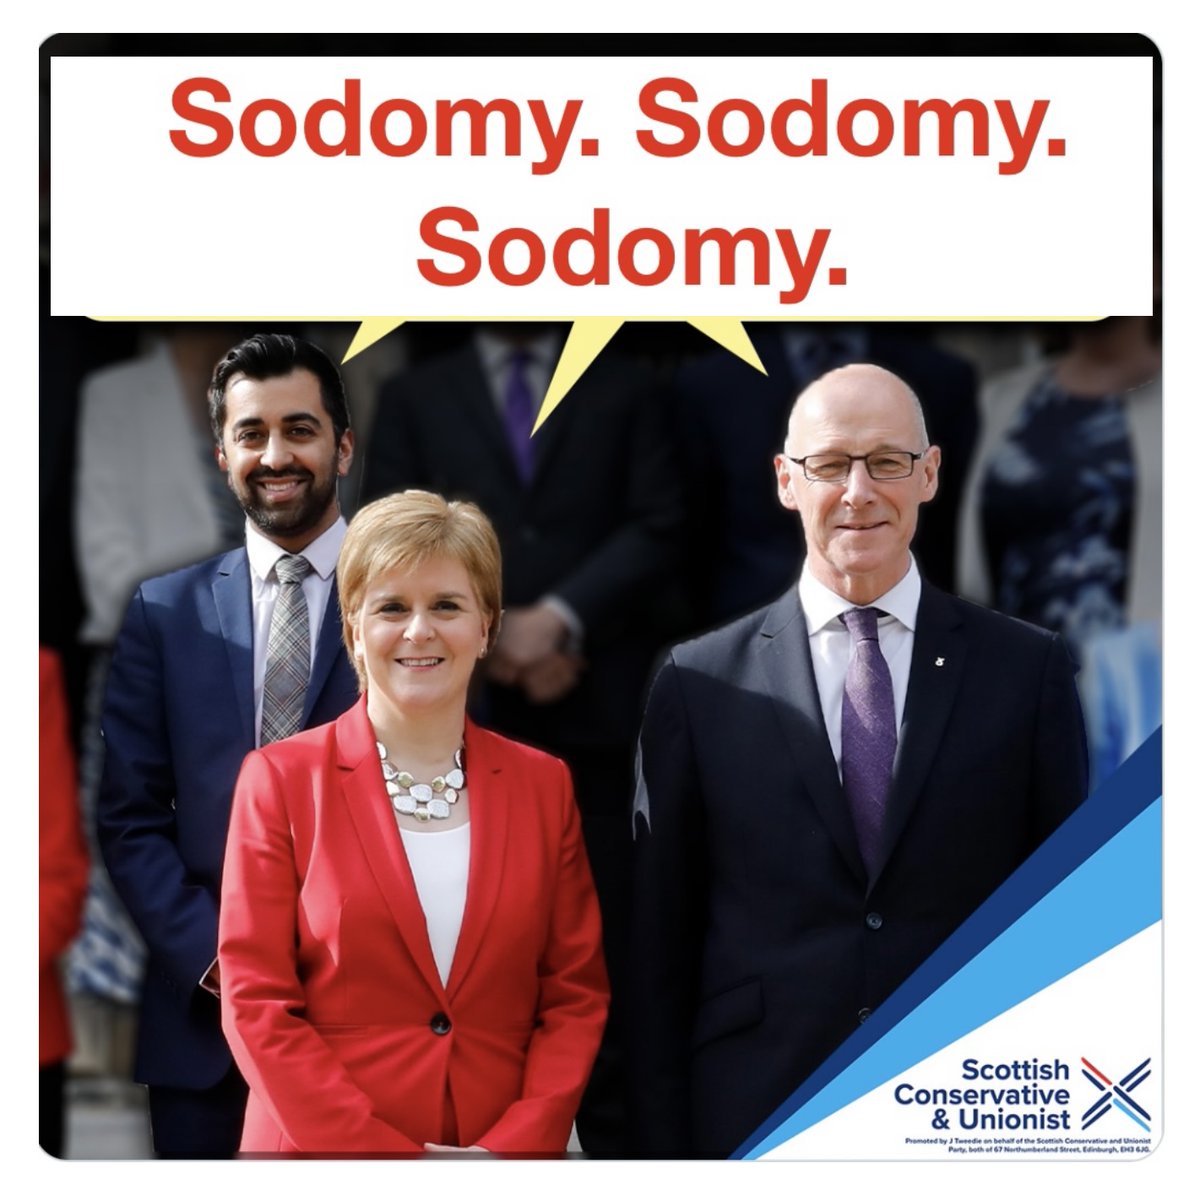 @ScotTories Here’s a far, far more accurate photograph. #groomers #childmutilators #Whatisawoman